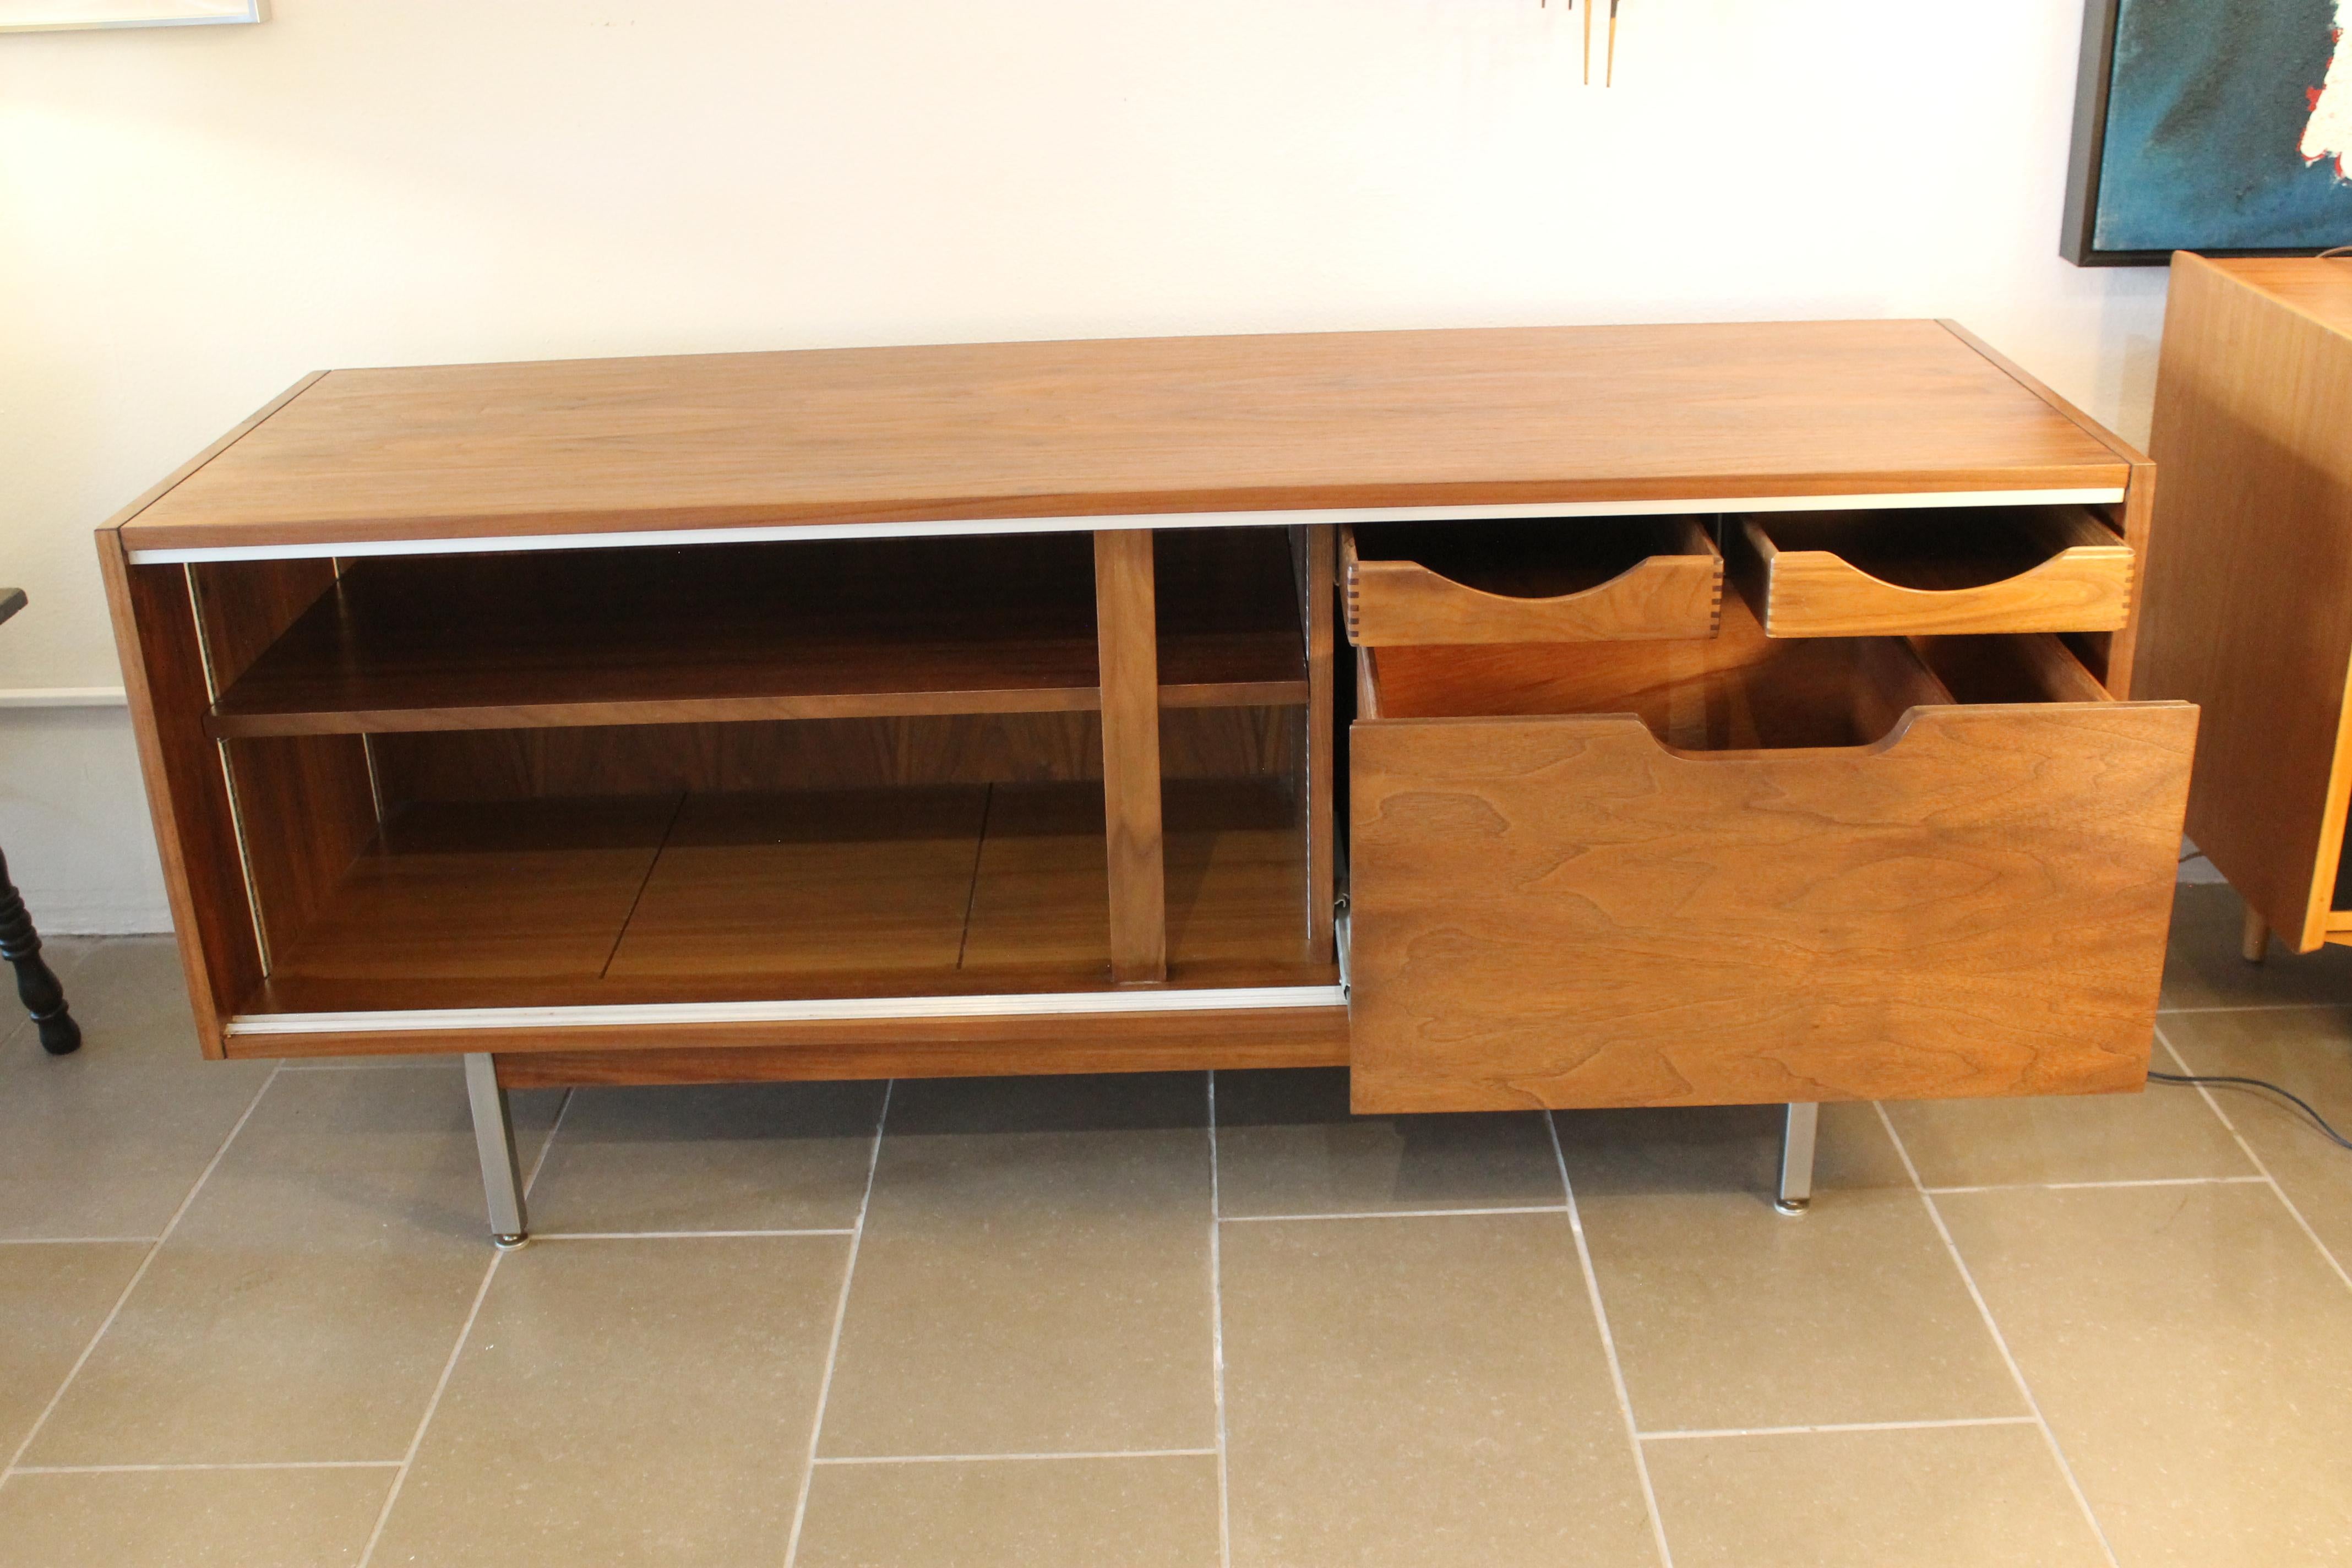 Mid-20th Century Credenza in the Style of George Nelson With Black and Grey Sliders